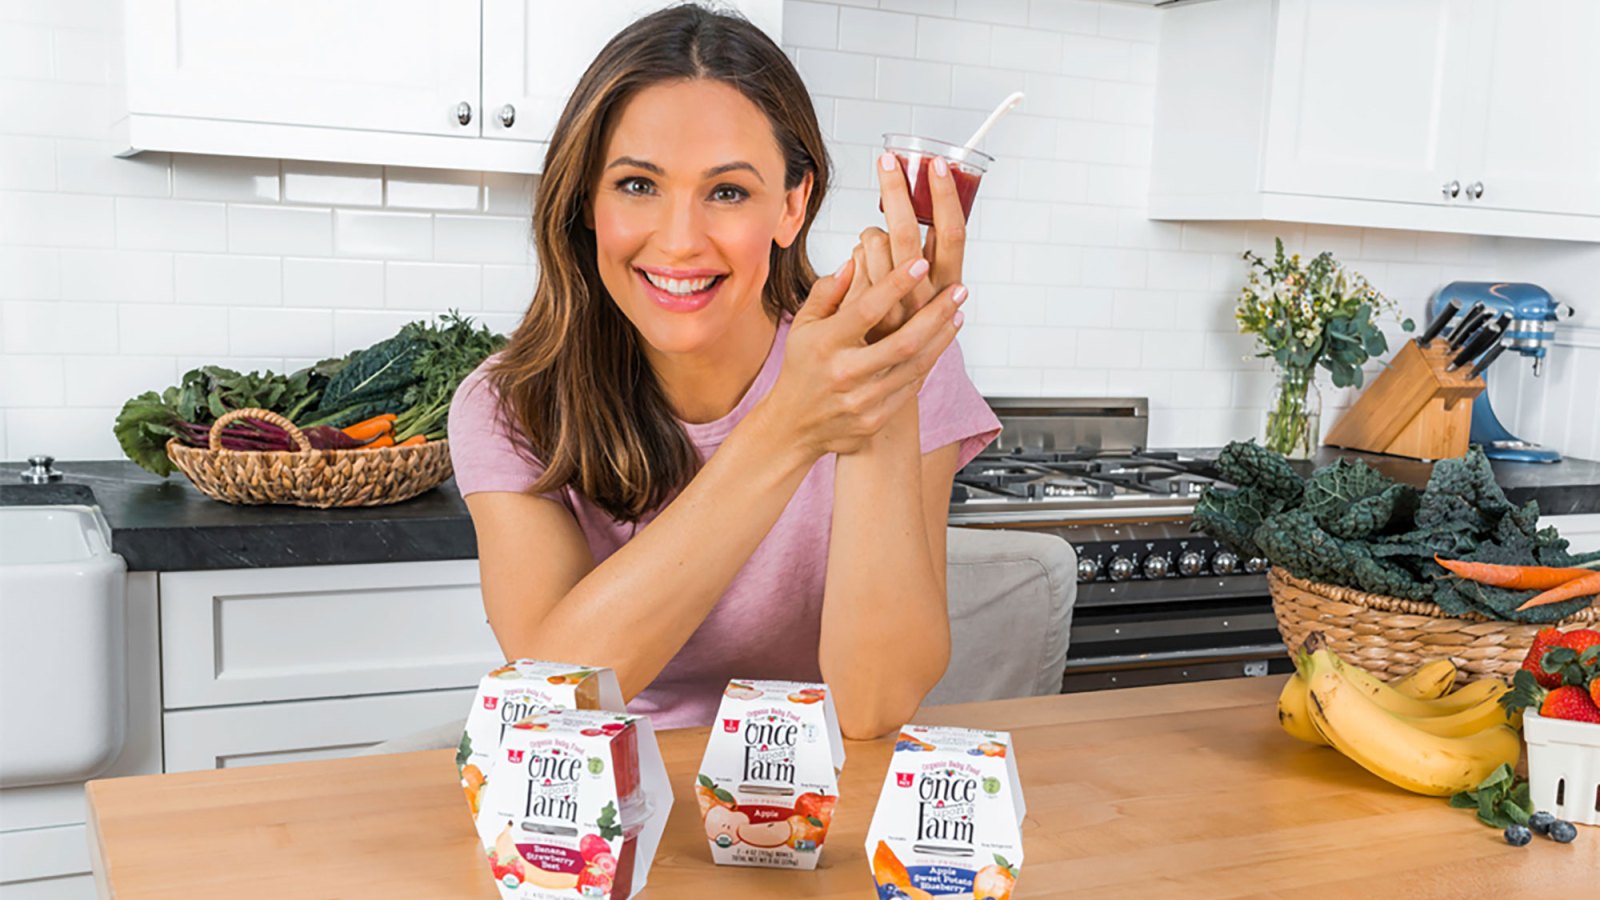 Jennifer Garner’s Organic Baby Food Line, Once Upon a Farm, Is Now Available to WIC Families